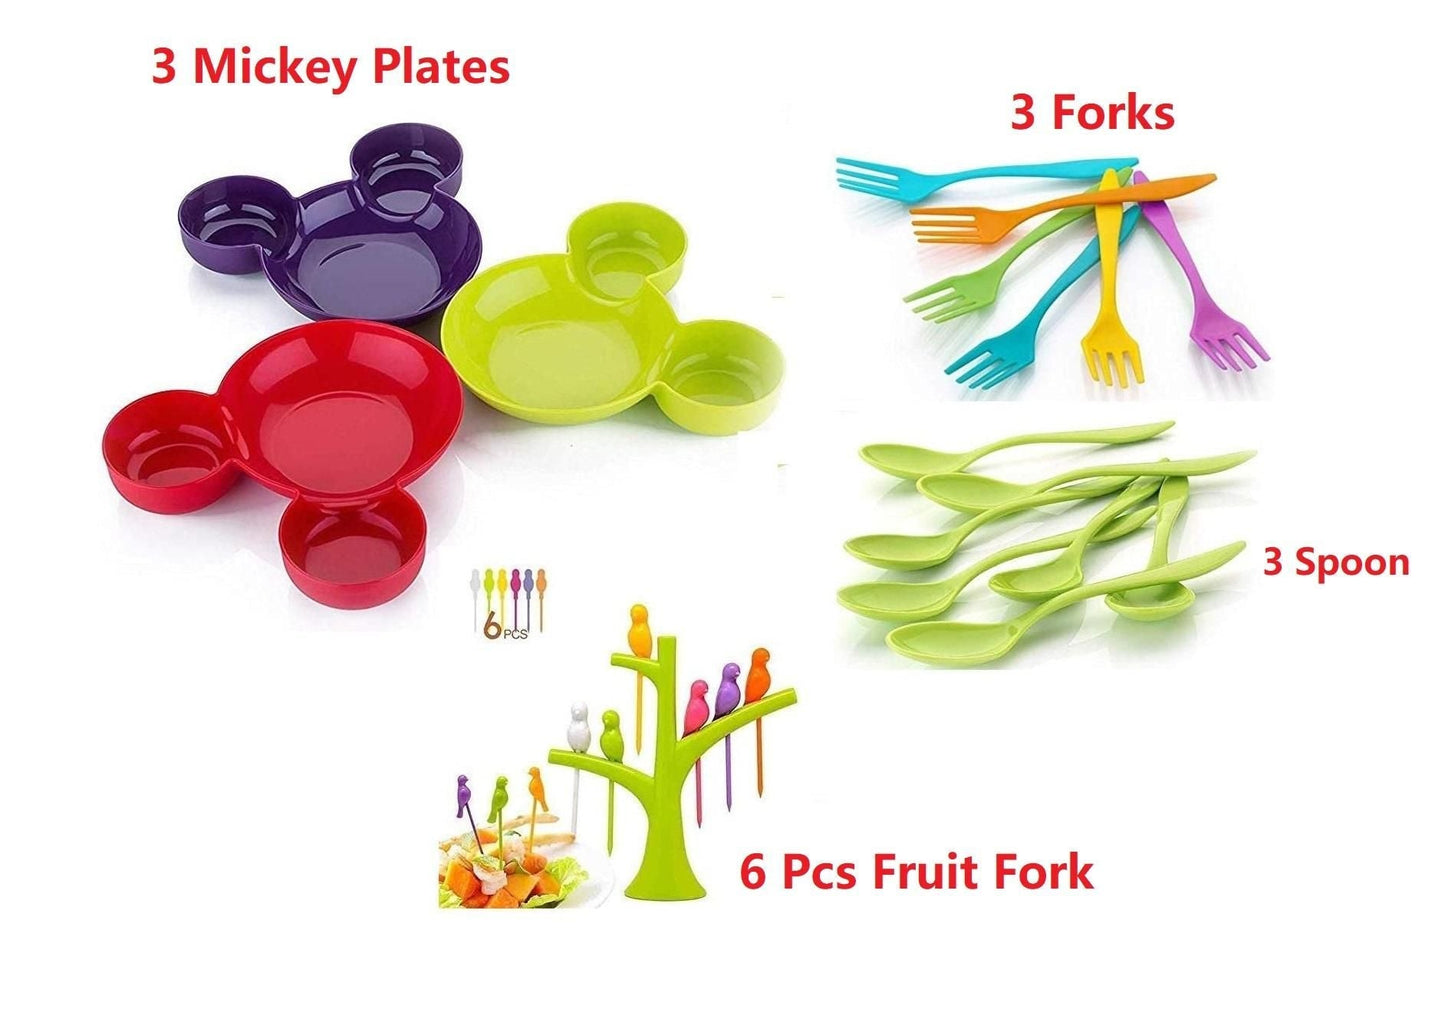 Plates - Children's Mickey Shaped Serving Food Plate, Spoon & Forks